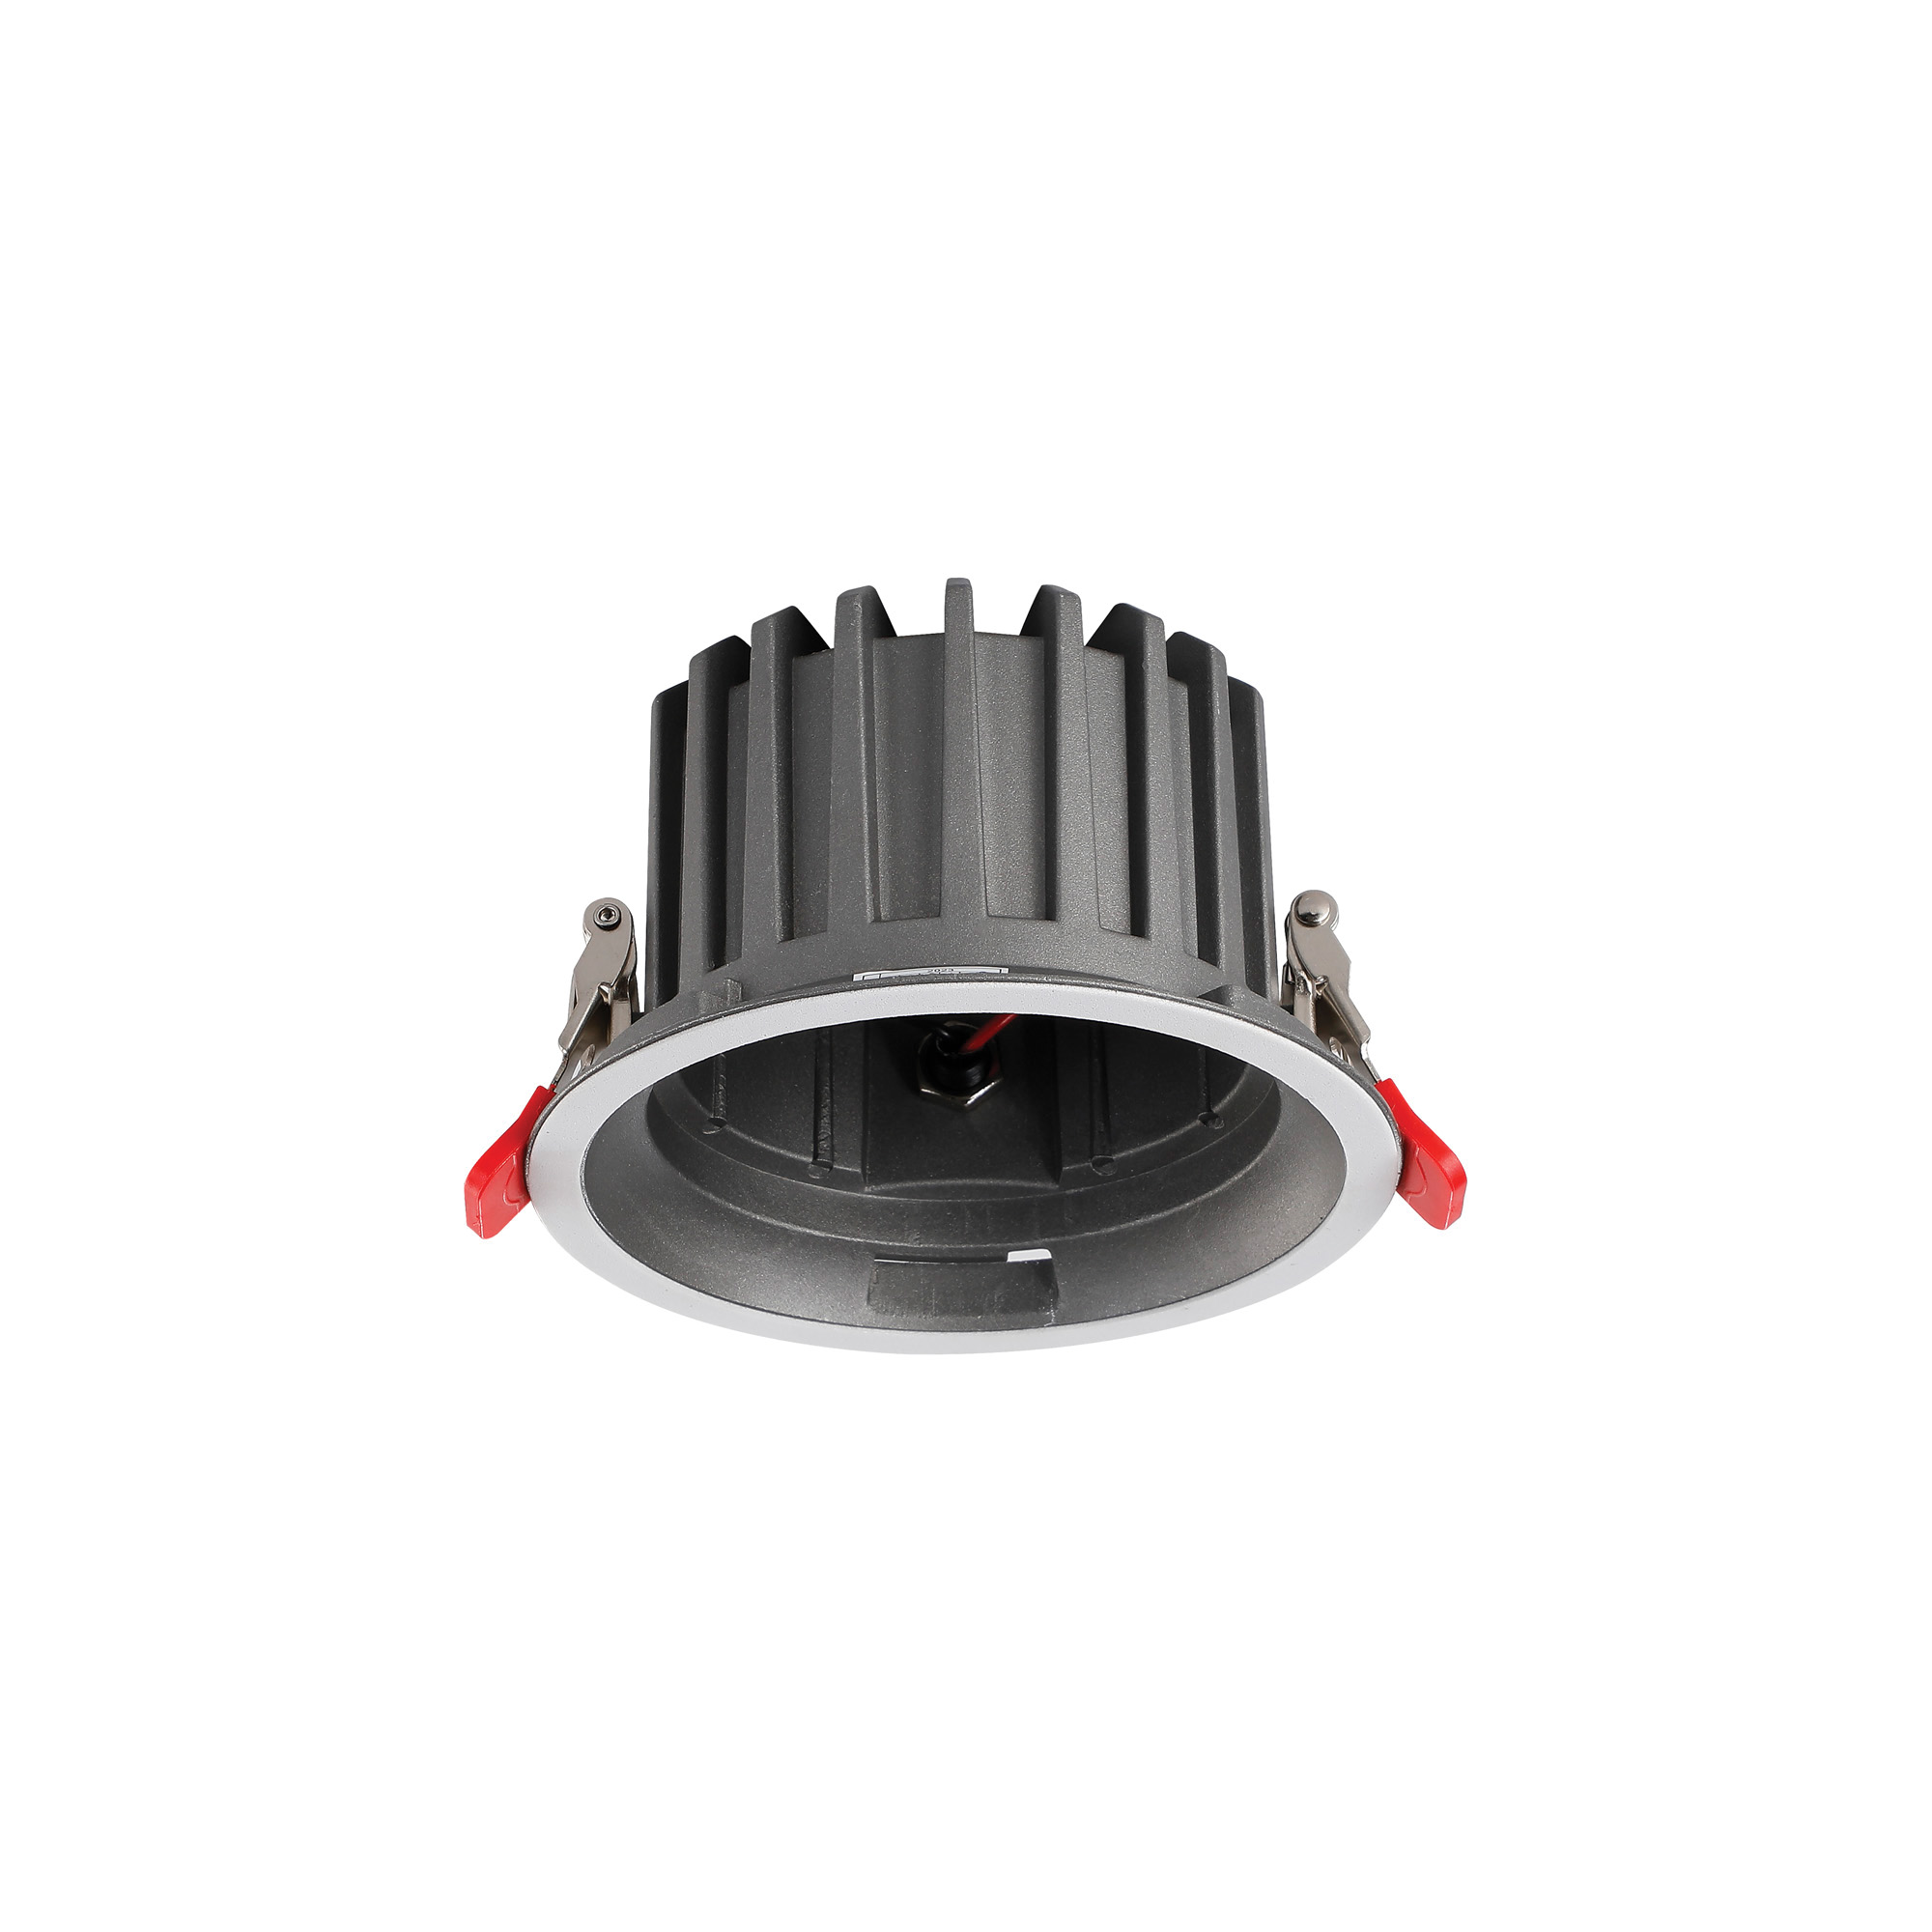 DX200420  Bionic 15W Round Recessed Fixed housing Only Without Light Engin , White, Suitable for Bionic Engine.